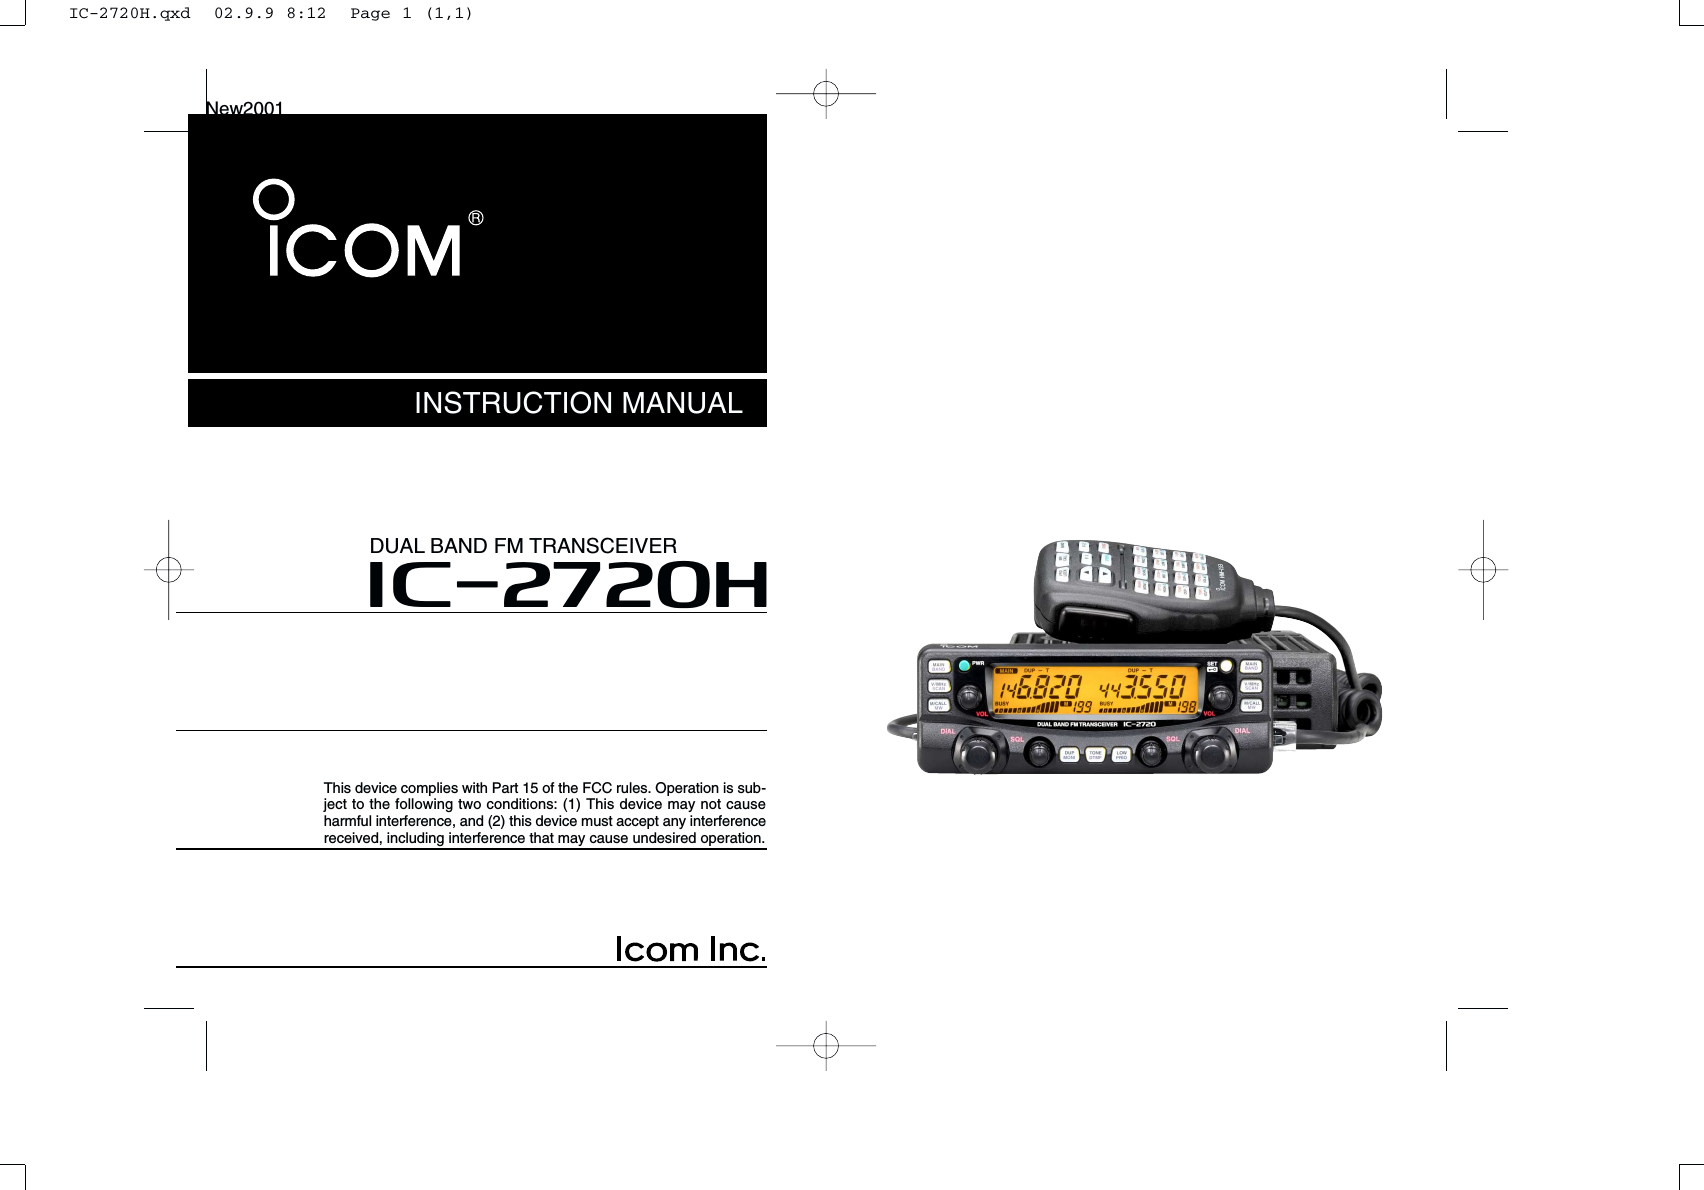 INSTRUCTION MANUALi2720HDUAL BAND FM TRANSCEIVERThis device complies with Part 15 of the FCC rules. Operation is sub-ject to the following two conditions: (1) This device may not causeharmful interference, and (2) this device must accept any interferencereceived, including interference that may cause undesired operation.New2001IC-2720H.qxd  02.9.9 8:12  Page 1 (1,1)